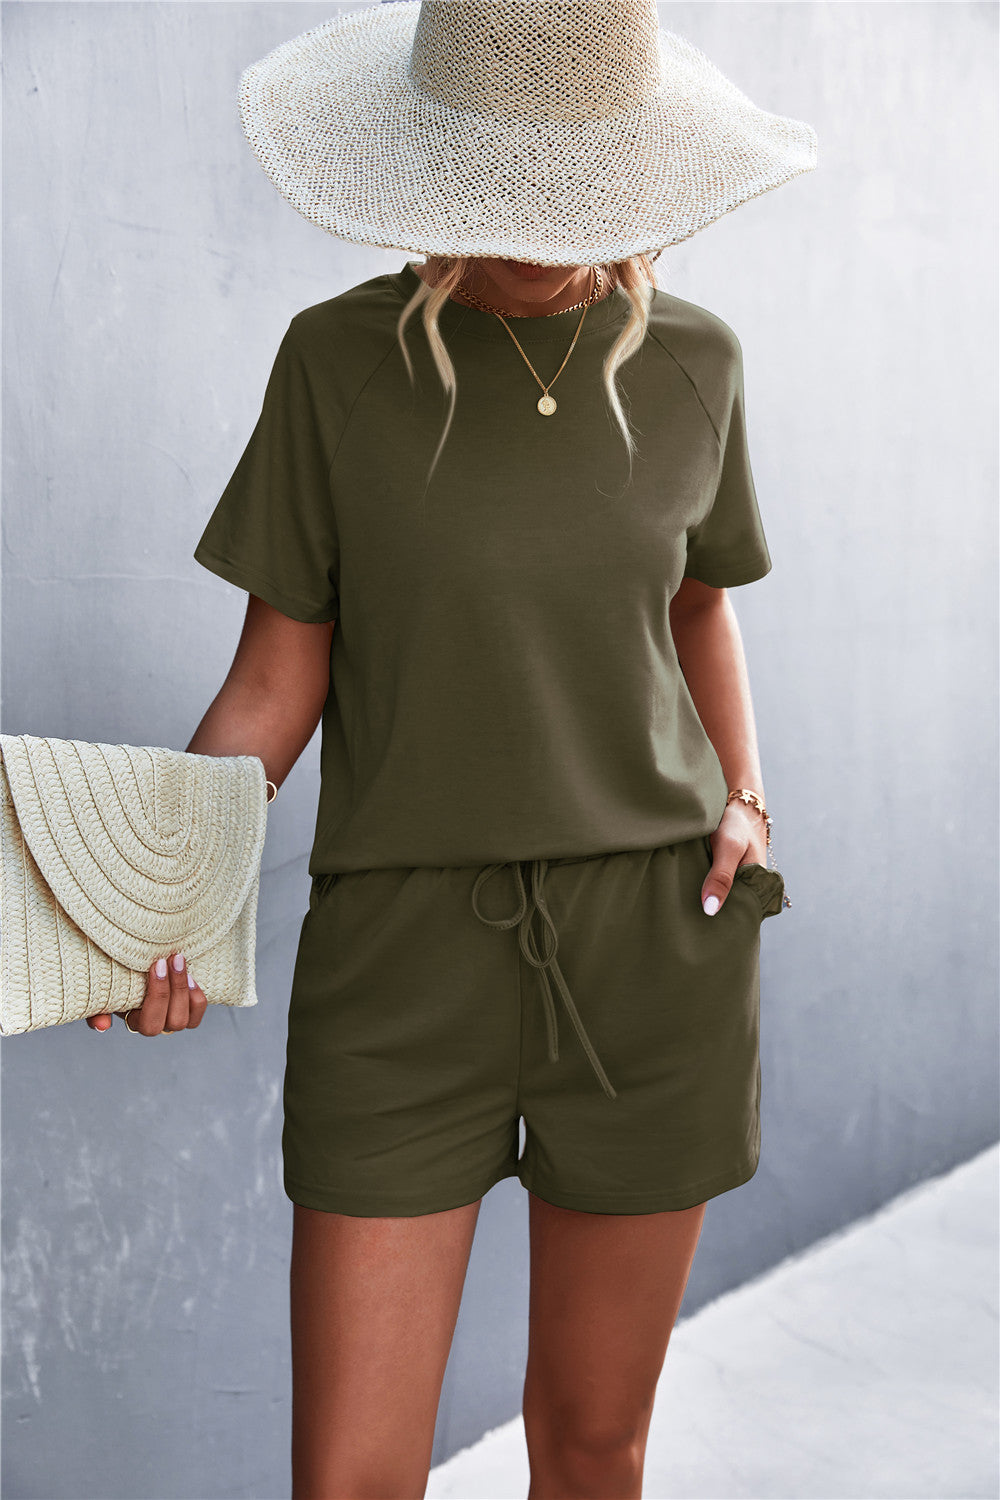 Raglan Sleeve Ruffle Hem Top and Shorts Set with Pockets- ONLINE ONLY 2-10 day Shipping